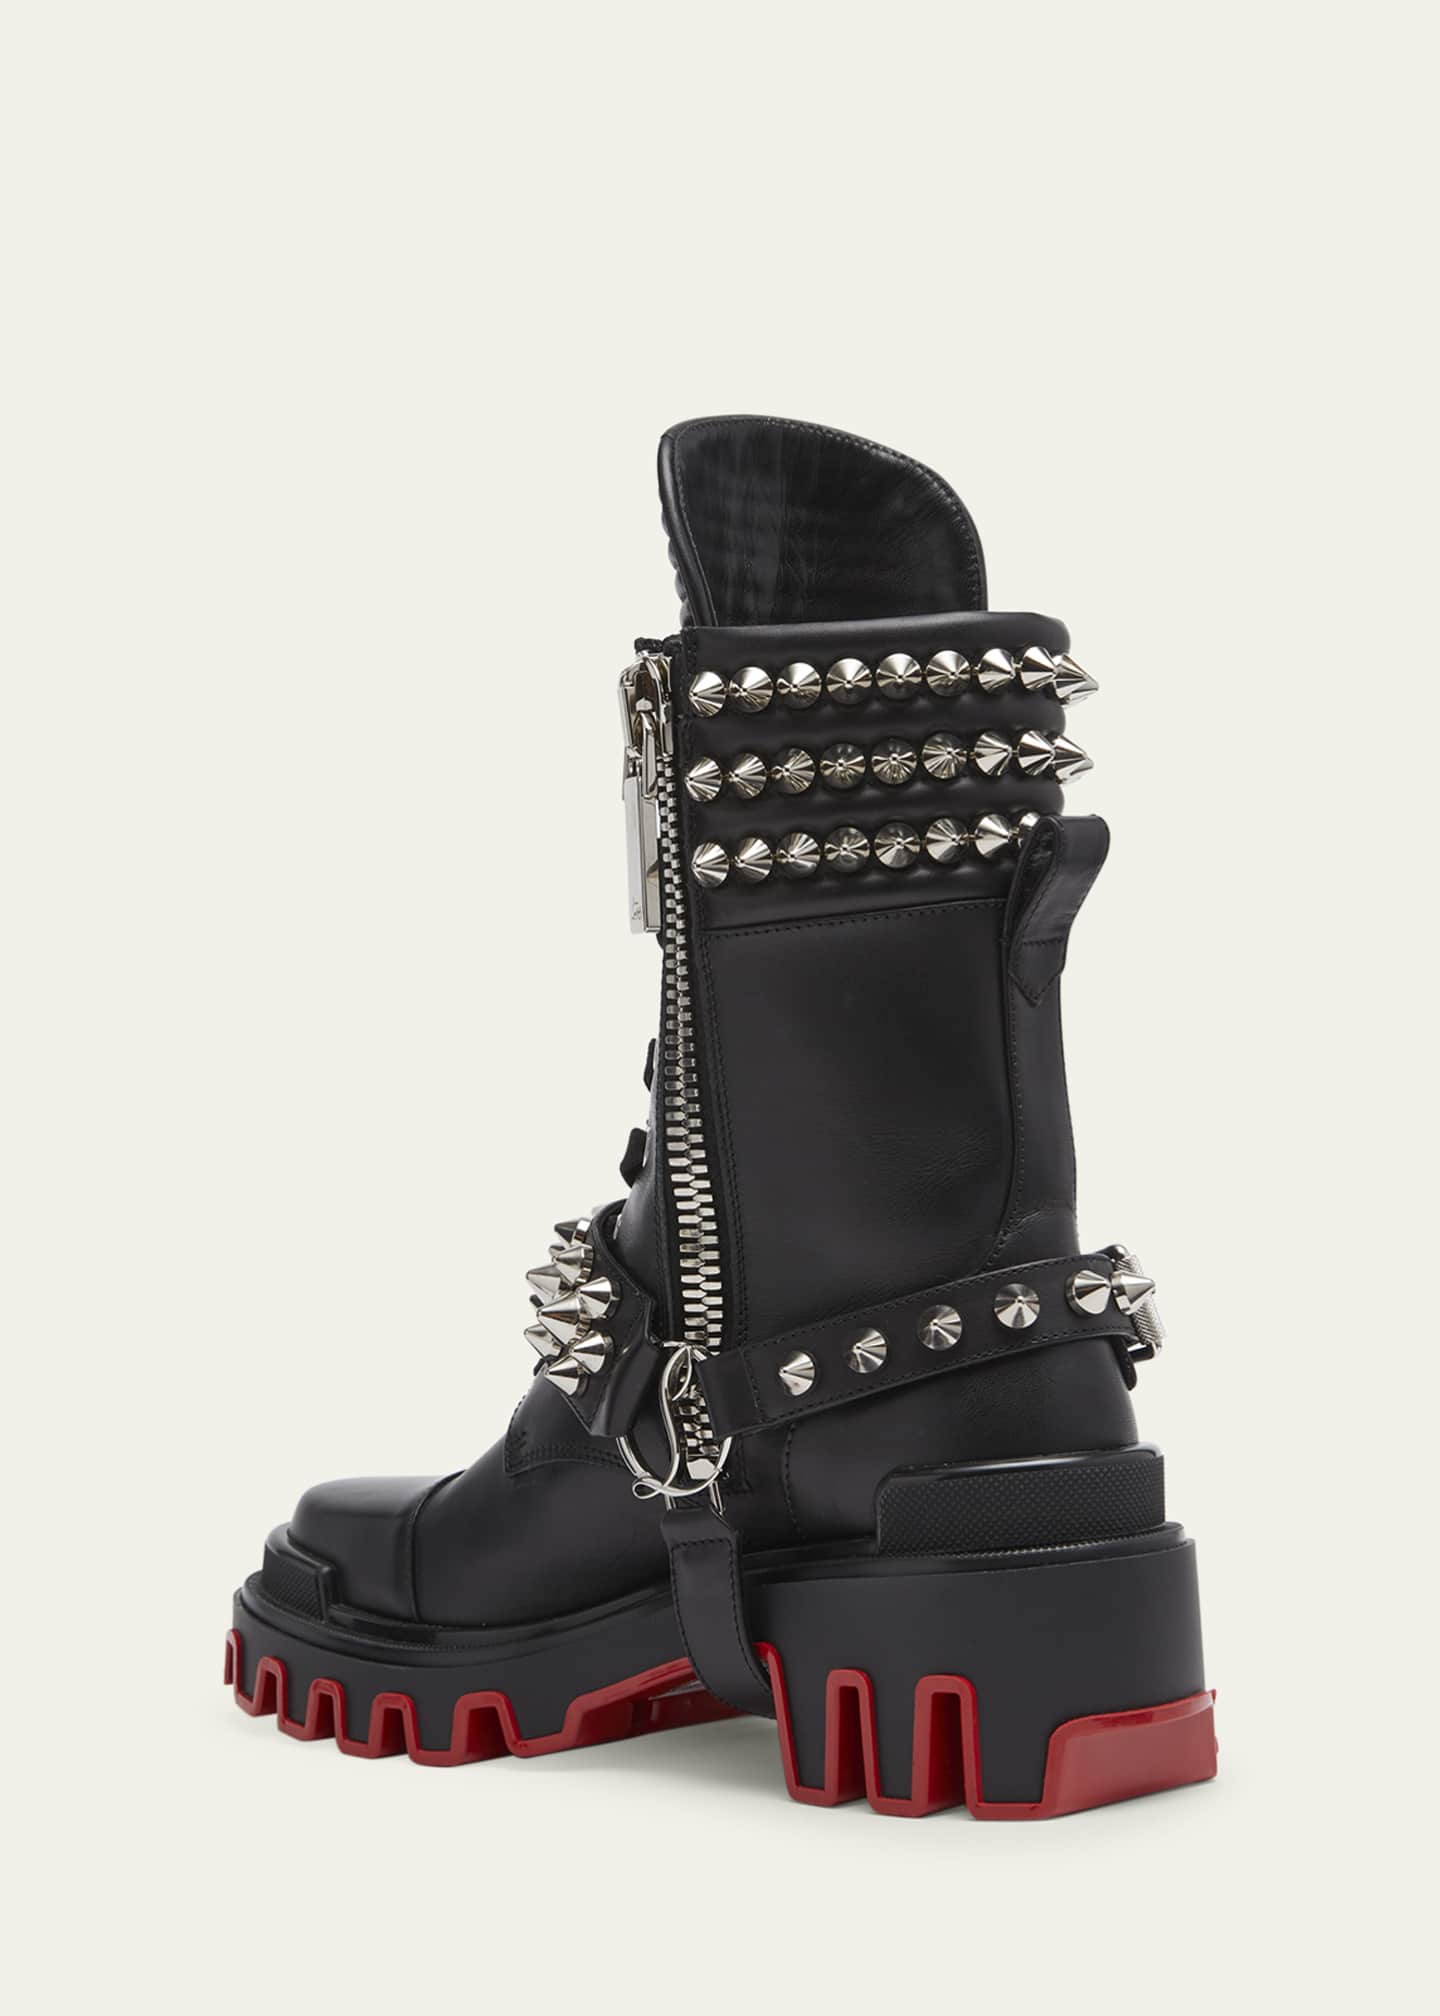 Christian Louboutin Janetta Red Sole Spike Leather Biker Boots ...